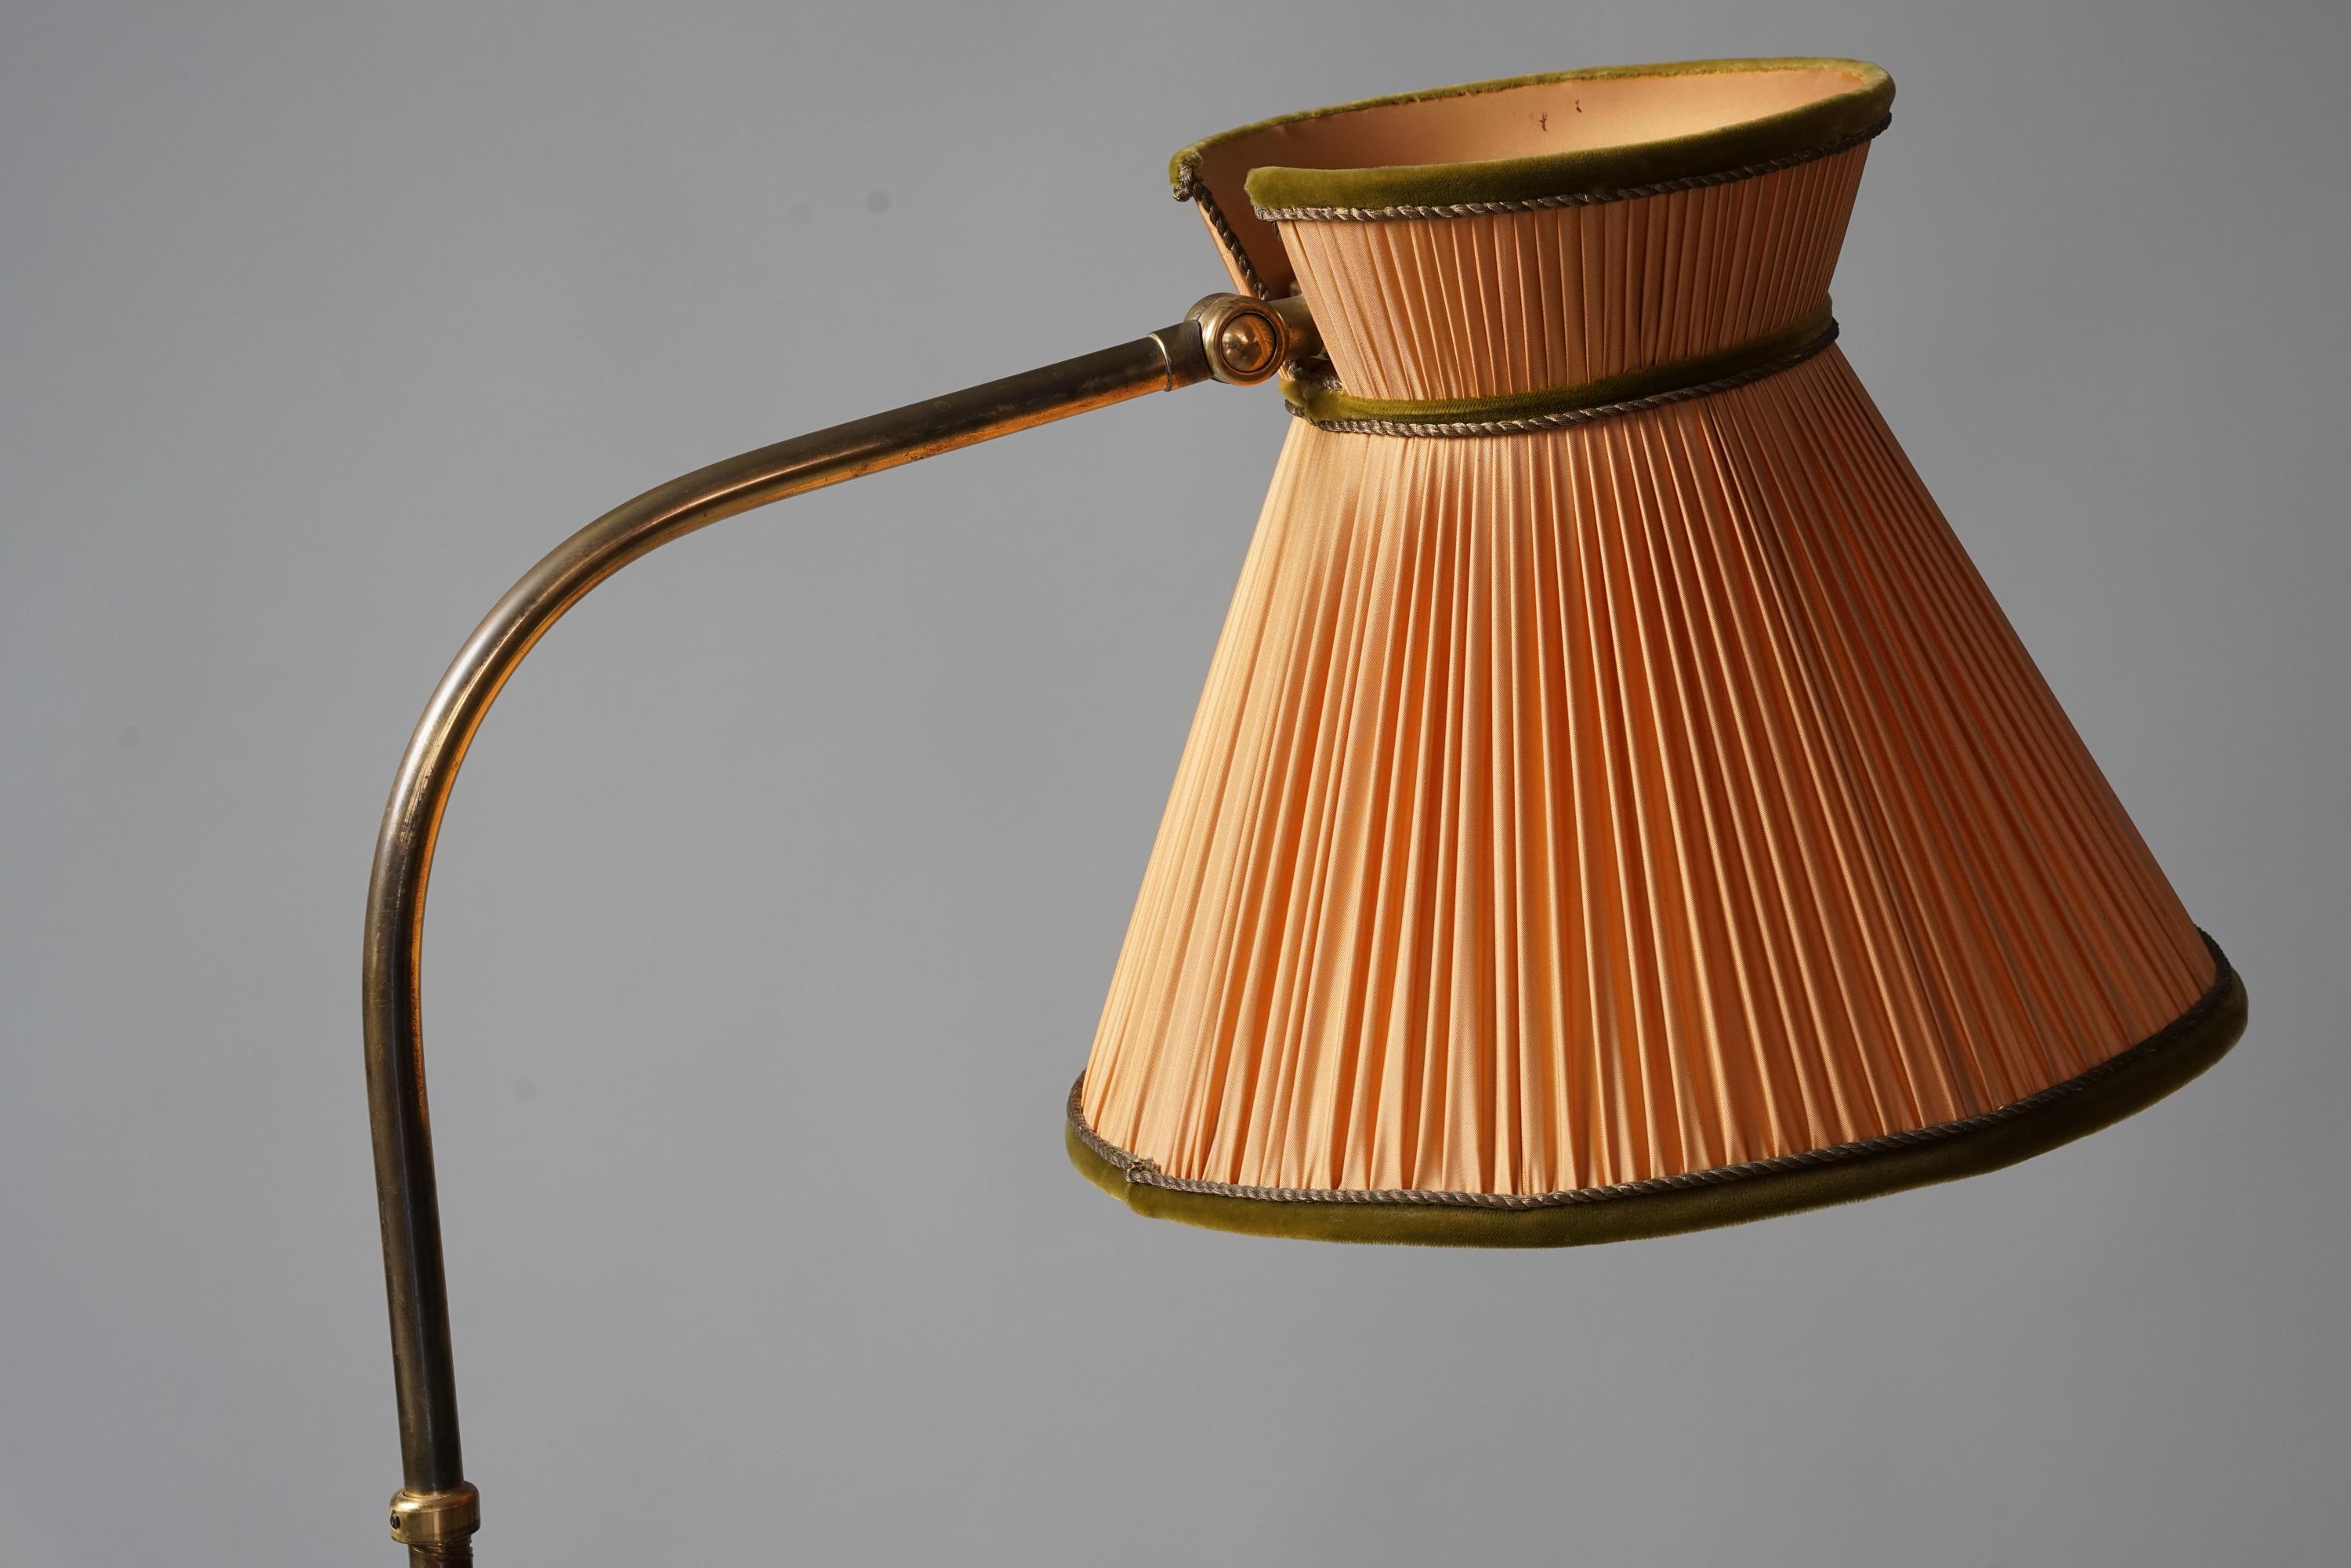 Model 2063 floor lamp, designed by Lisa Johansson-Pape, manufactured by Orno Oy, 1940/1950s. Brass with original lampshade and faux leather wrapping. Good vintage condition, minor patina consistent with age and use. Beautiful Scandinavian Modern